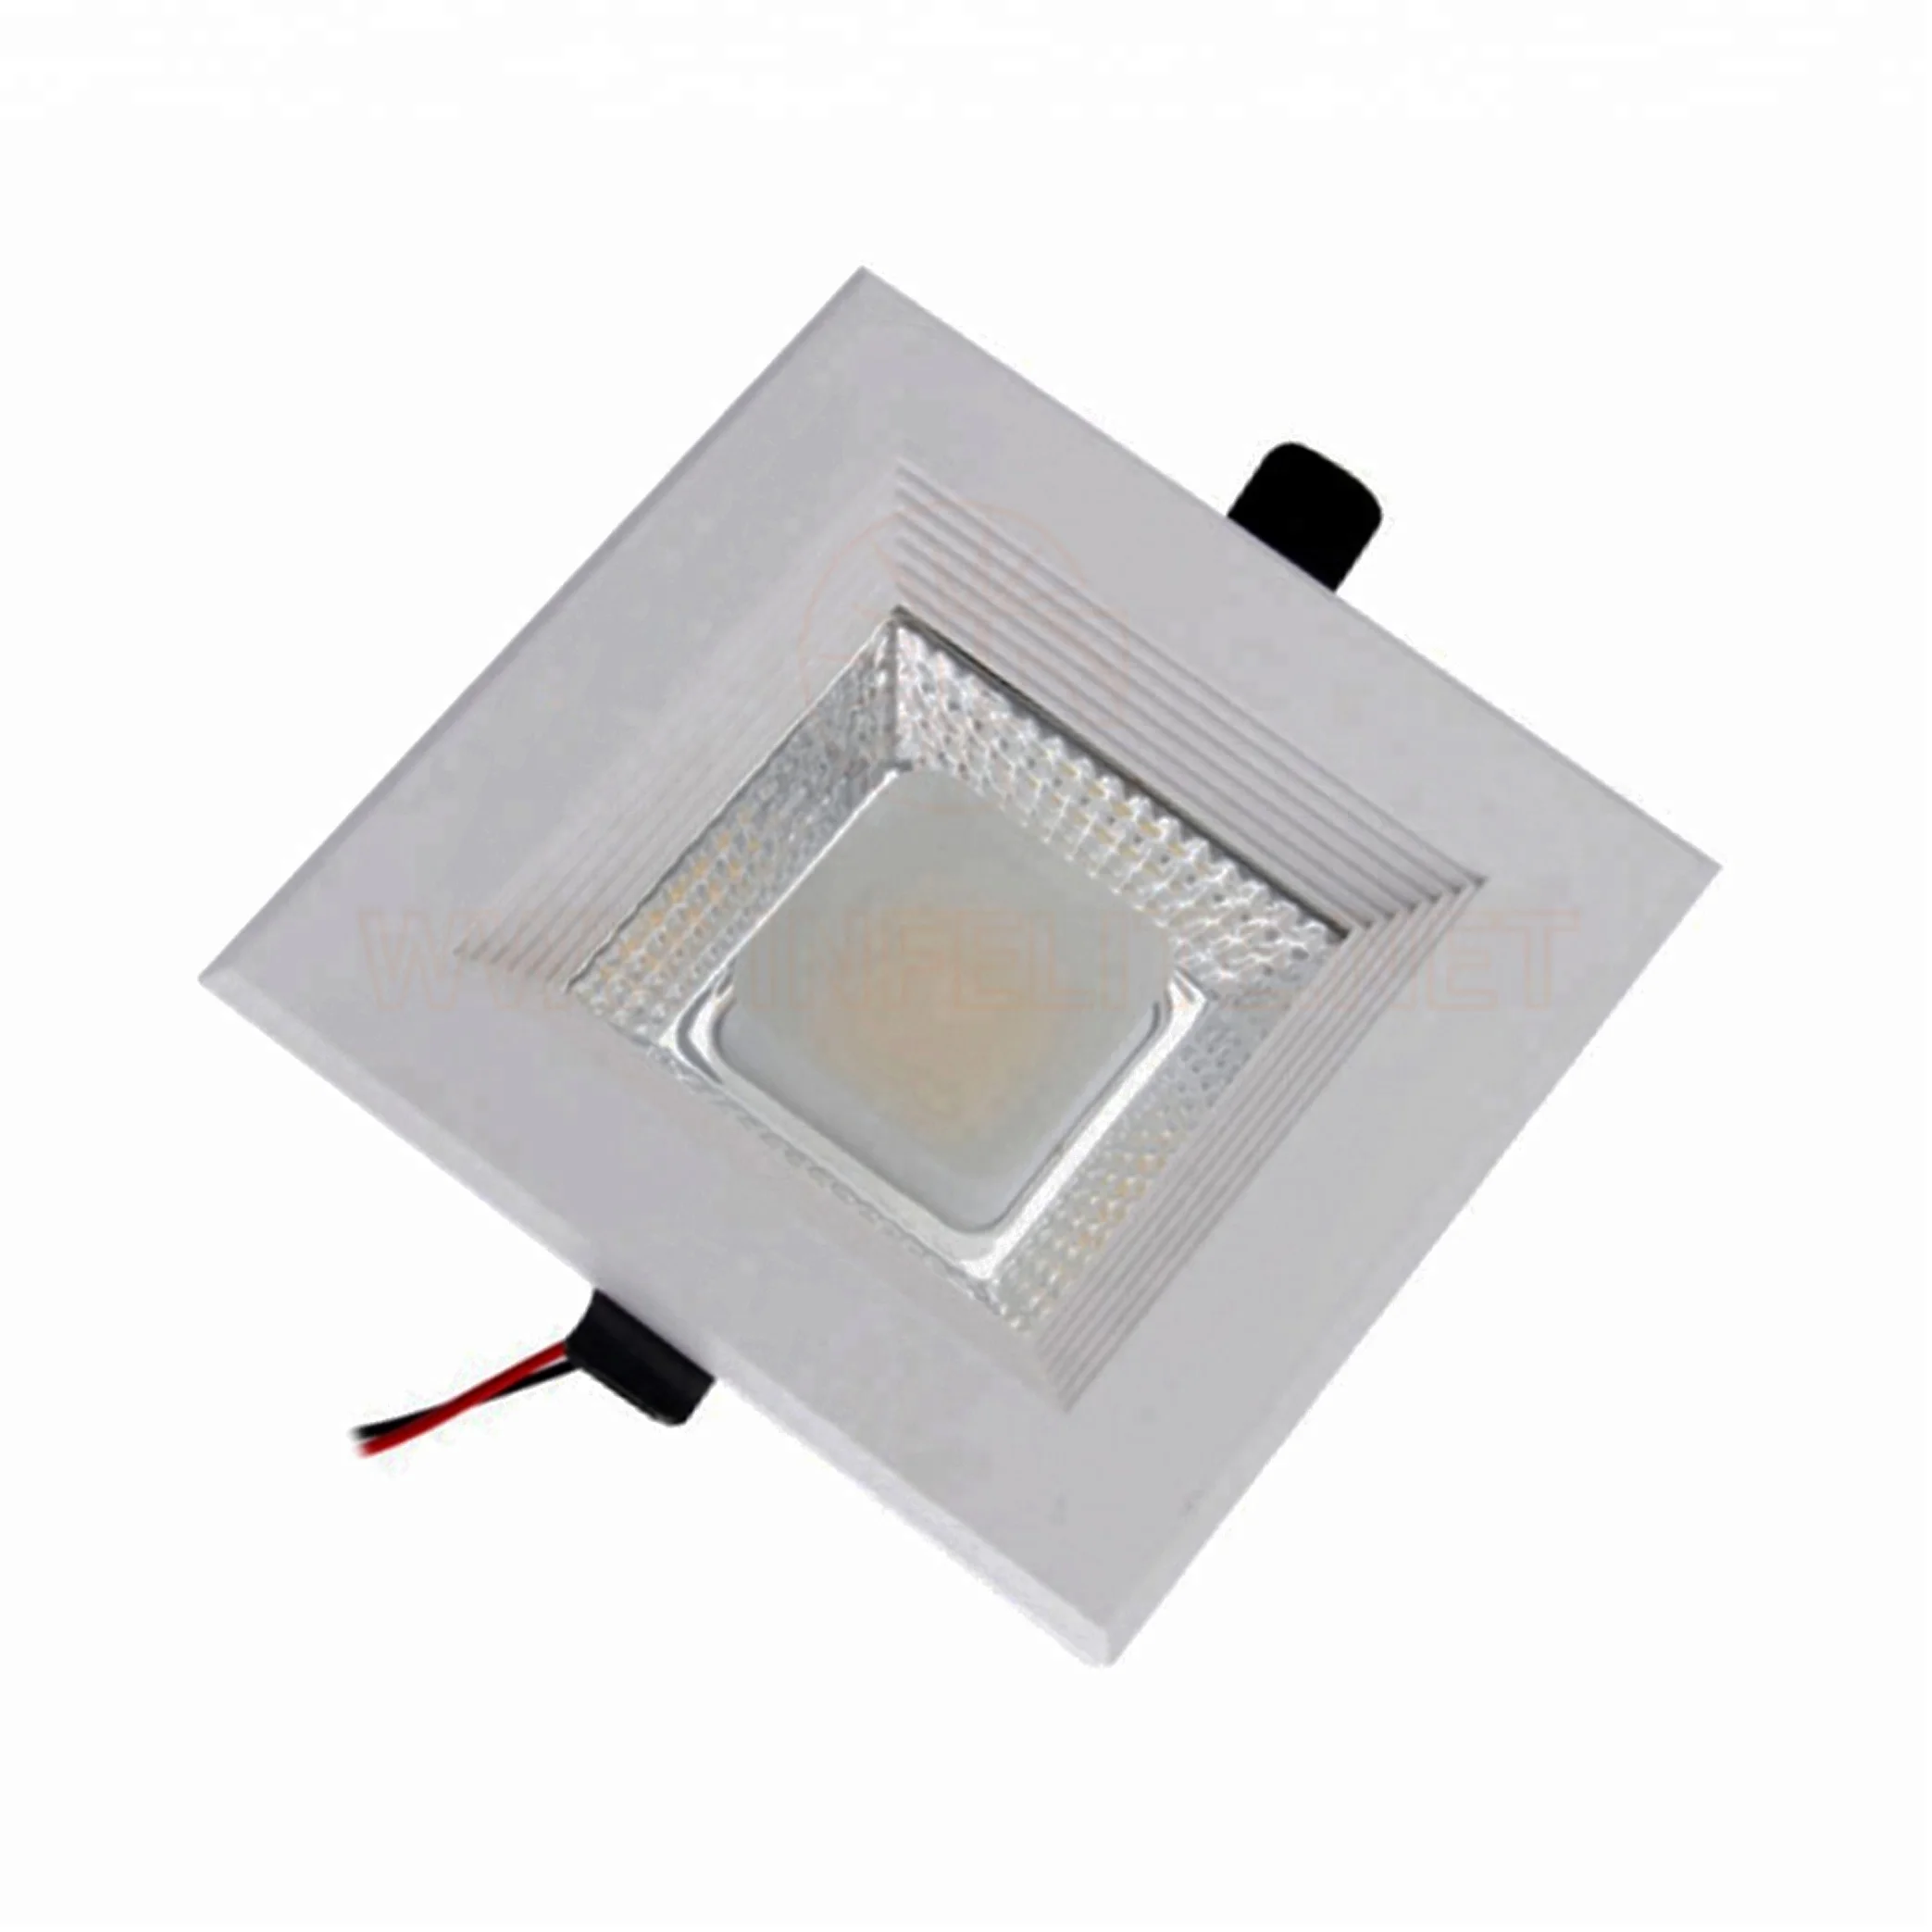 IN-DL108 Square Recessed Indoor Office Store Die Cast Aluminum 8W 10W 15W 20W 30W COB LED Ceiling Downlight Down Light Fixture